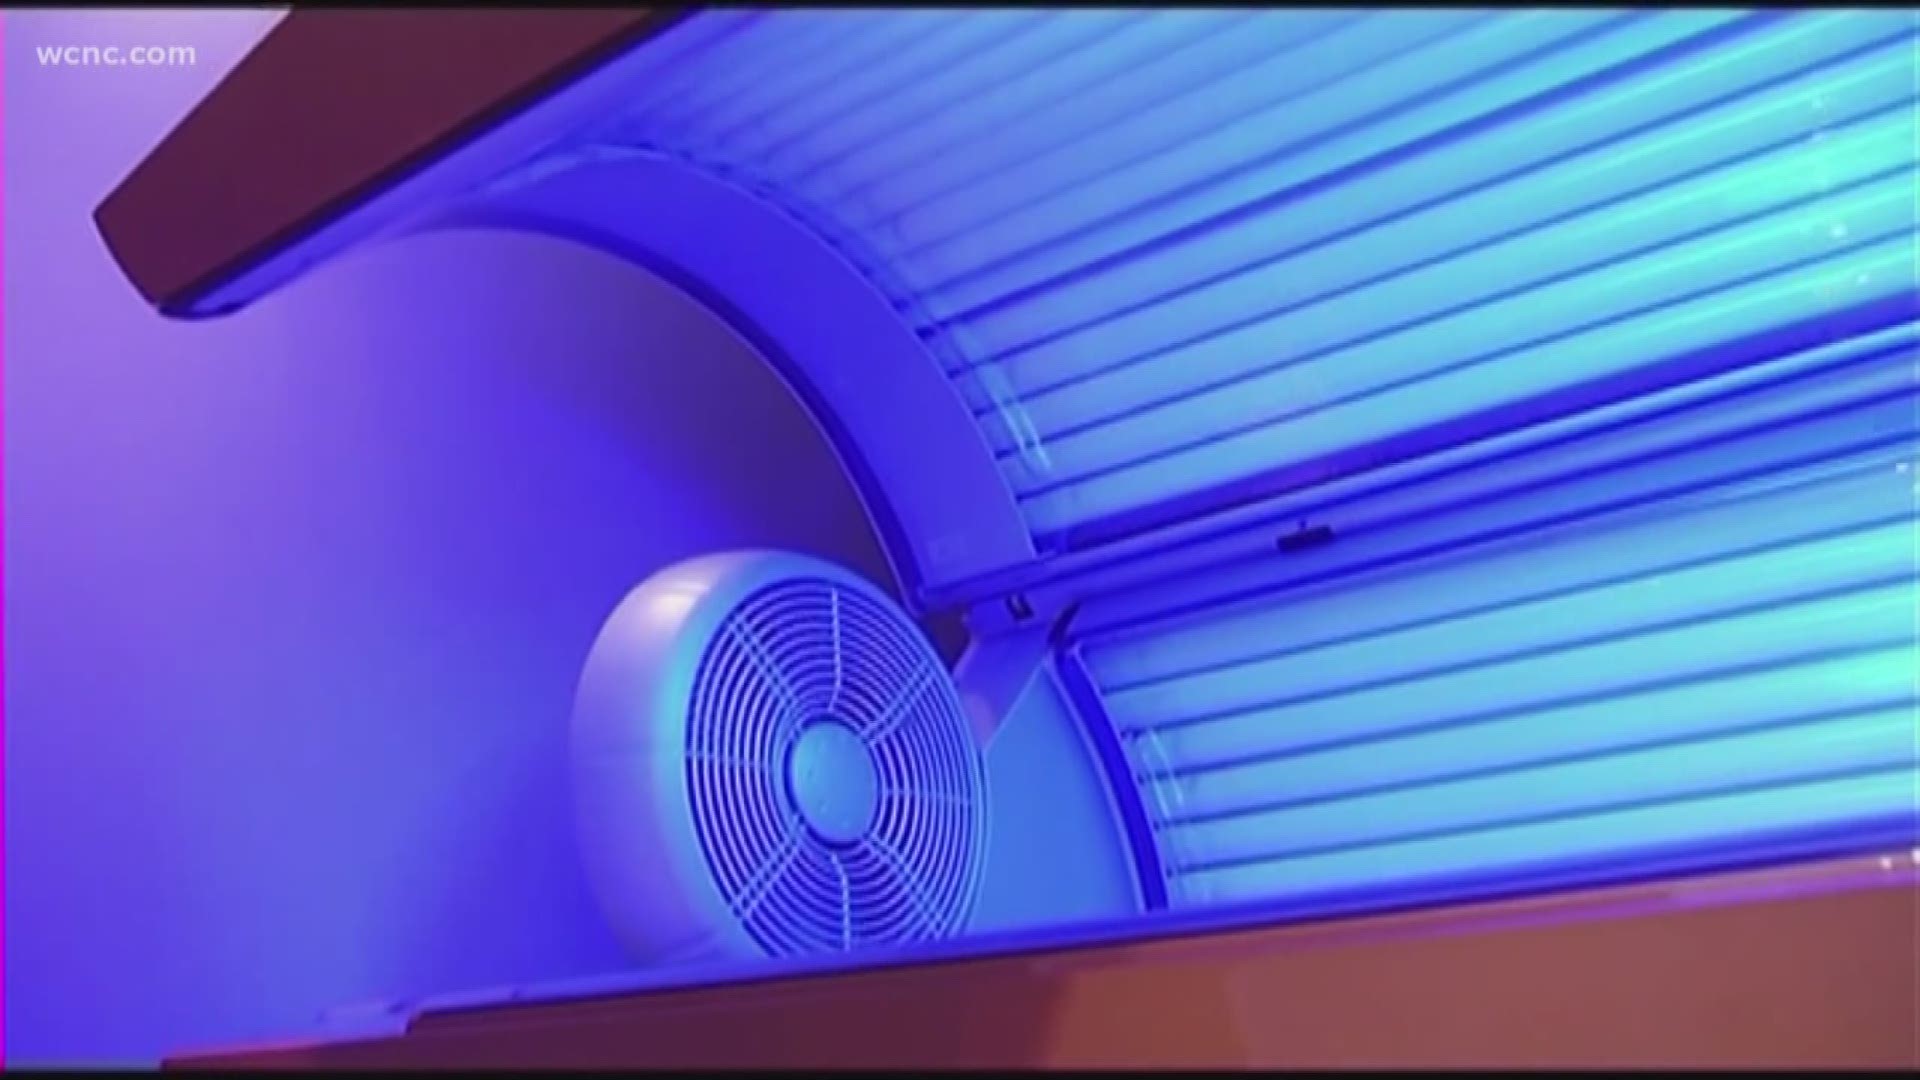 Lawmakers in South Carolina are working to pass the "Teen Skin Cancer Prevention Act." The bill aims to restrict anyone under 18 from using a tanning bed, regardless of parental consent.